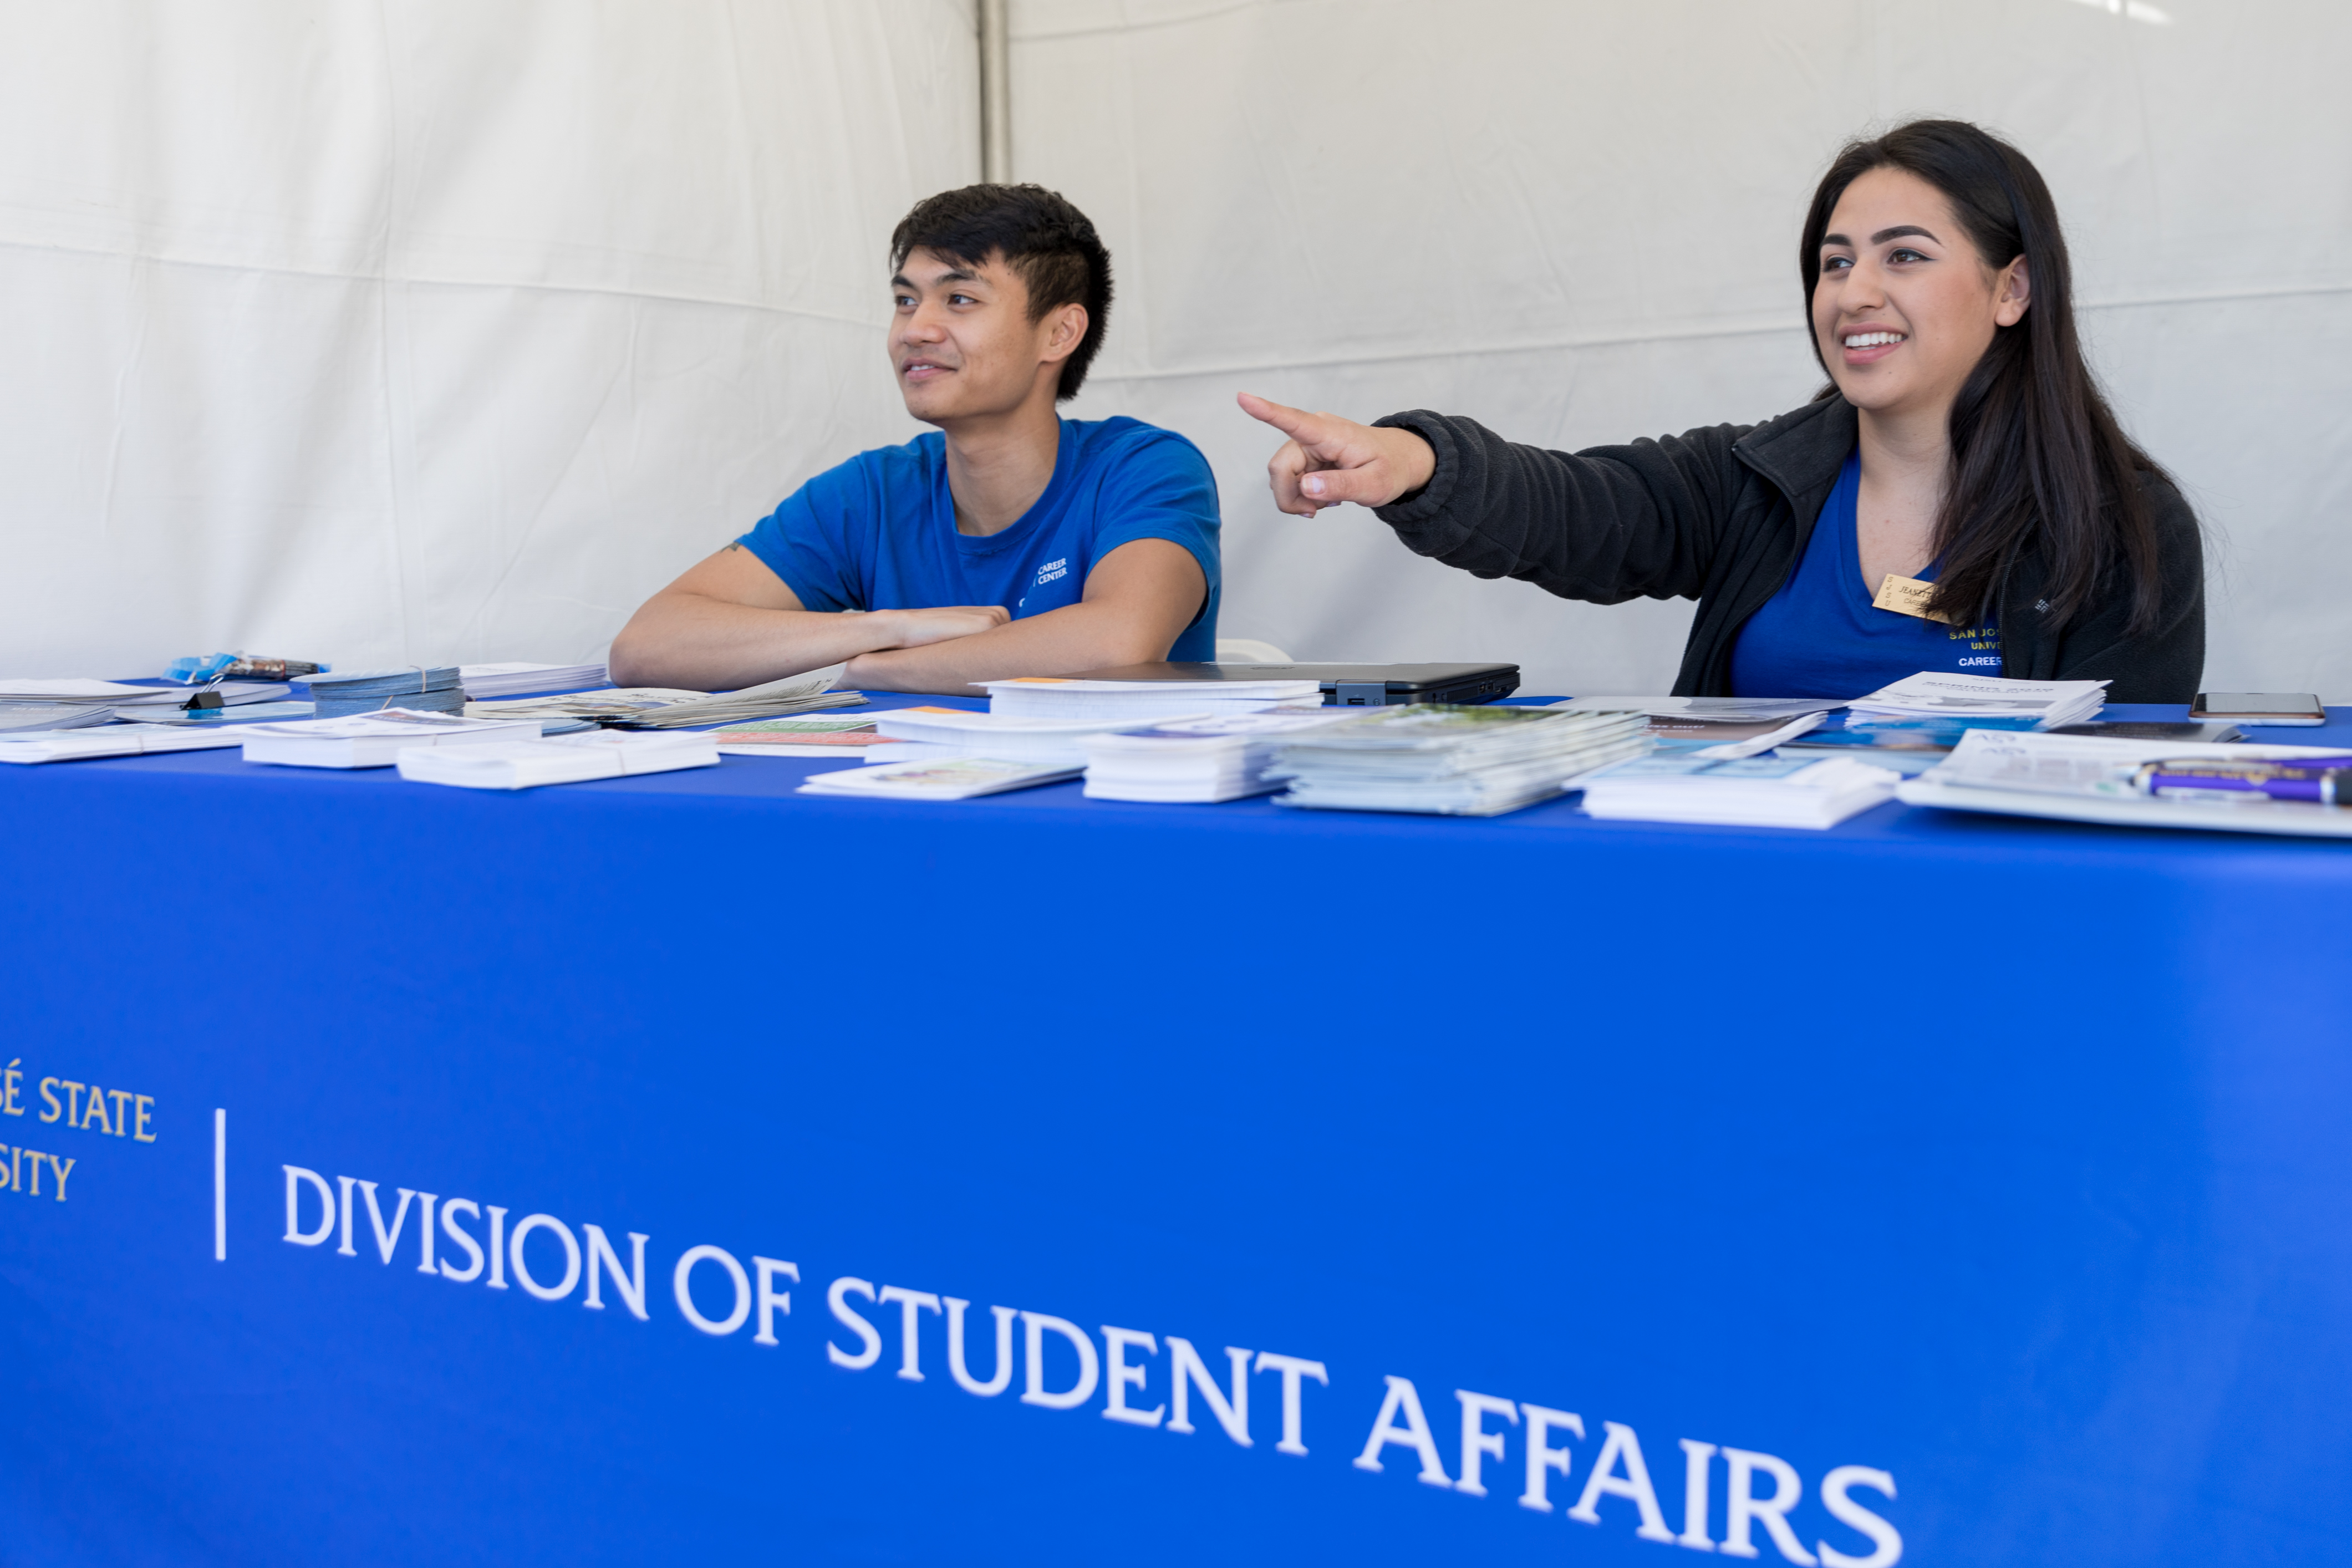 Tabling event with the Division of Student Affairs.